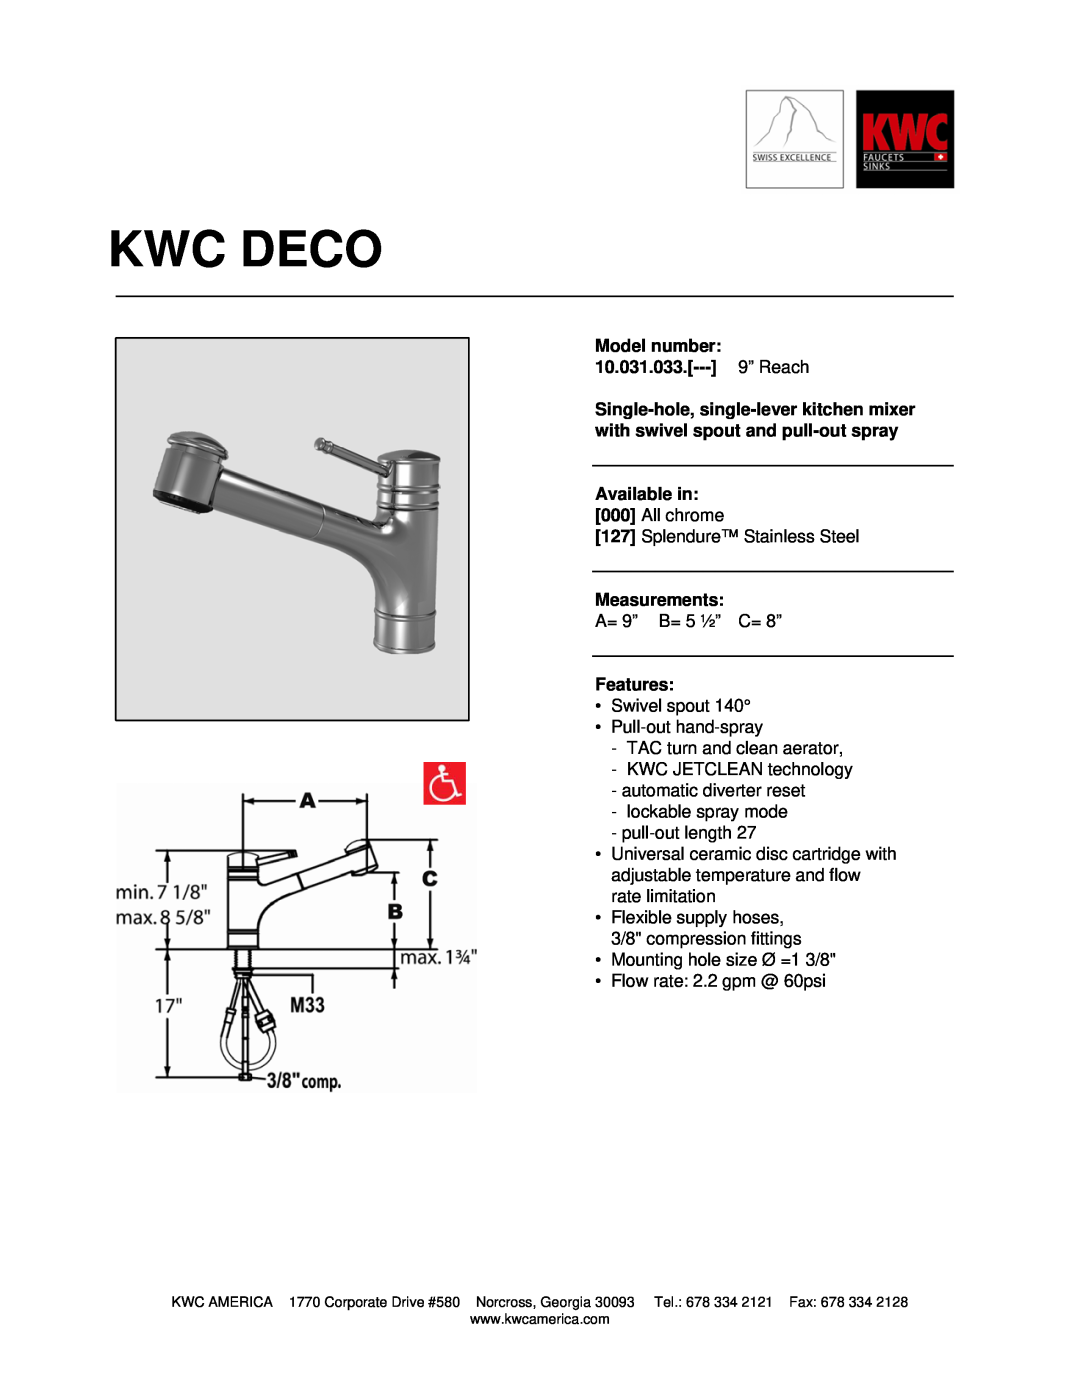 KWC manual Kwc Deco, Model number 10.031.033.--- 9” Reach, Available in, Measurements, Features 